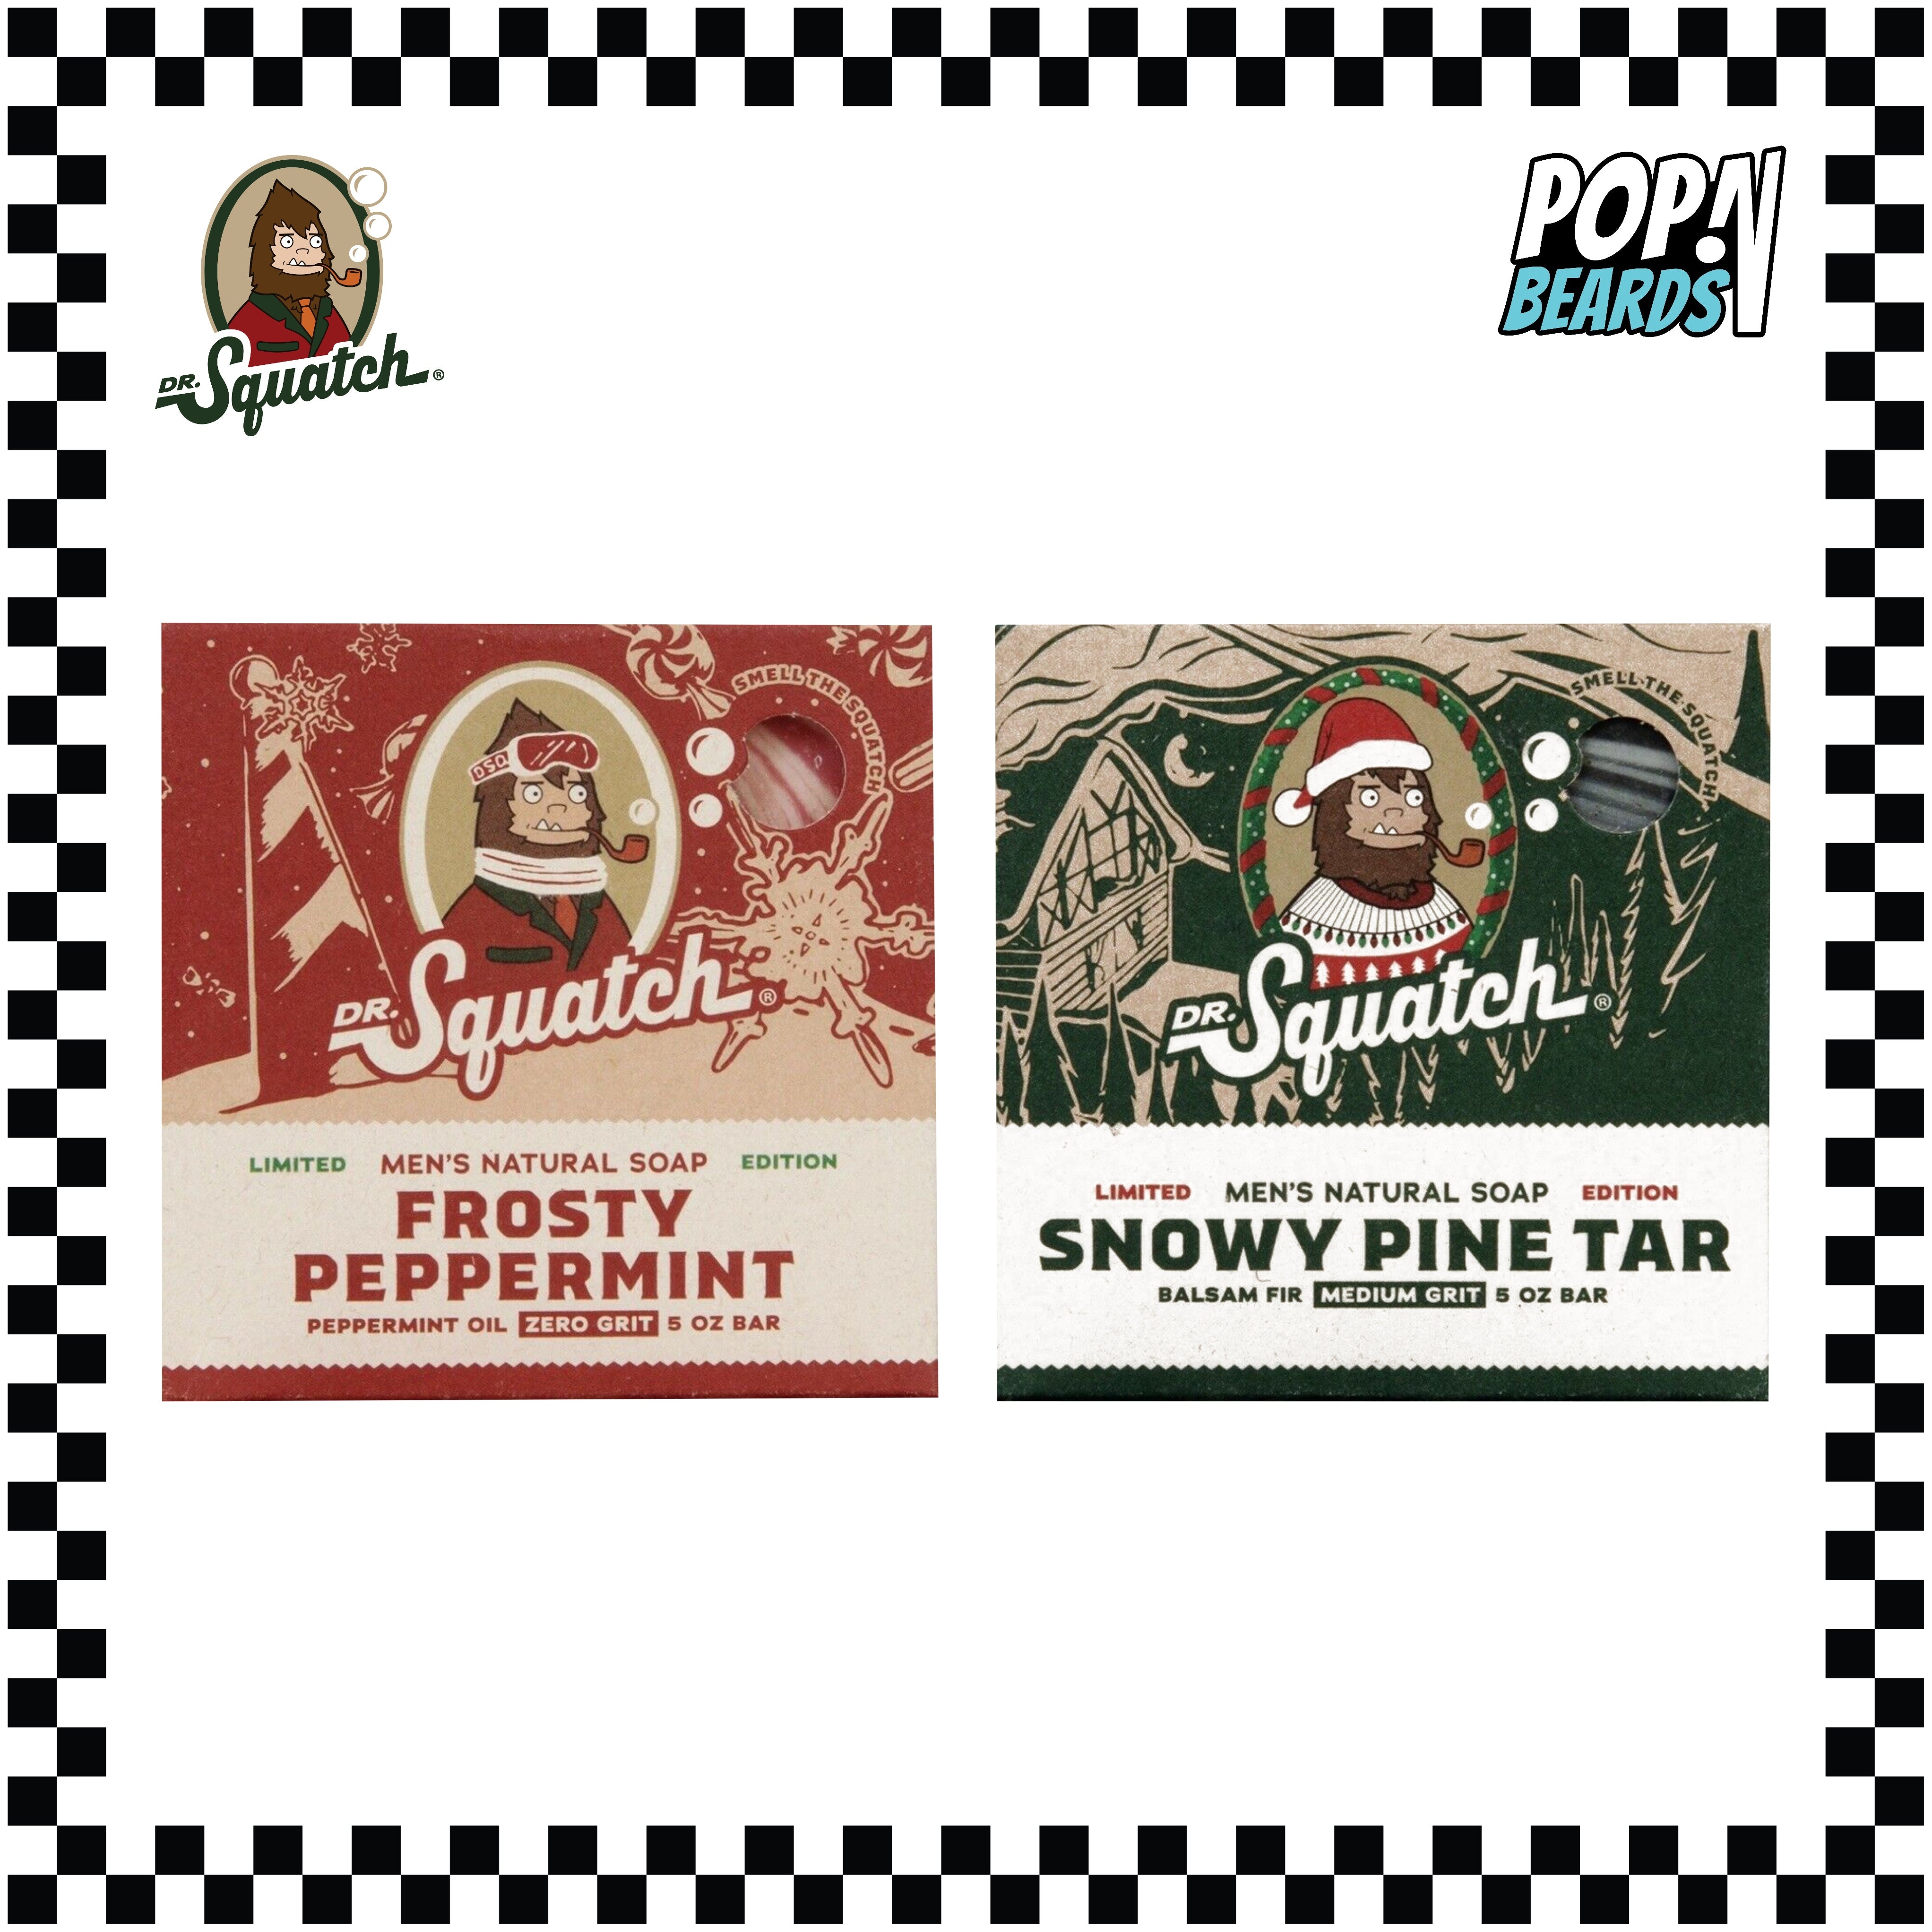 2-Pack of Dr Squatch Frosty Peppermint Mens Natural Limited Edition Bar Soap